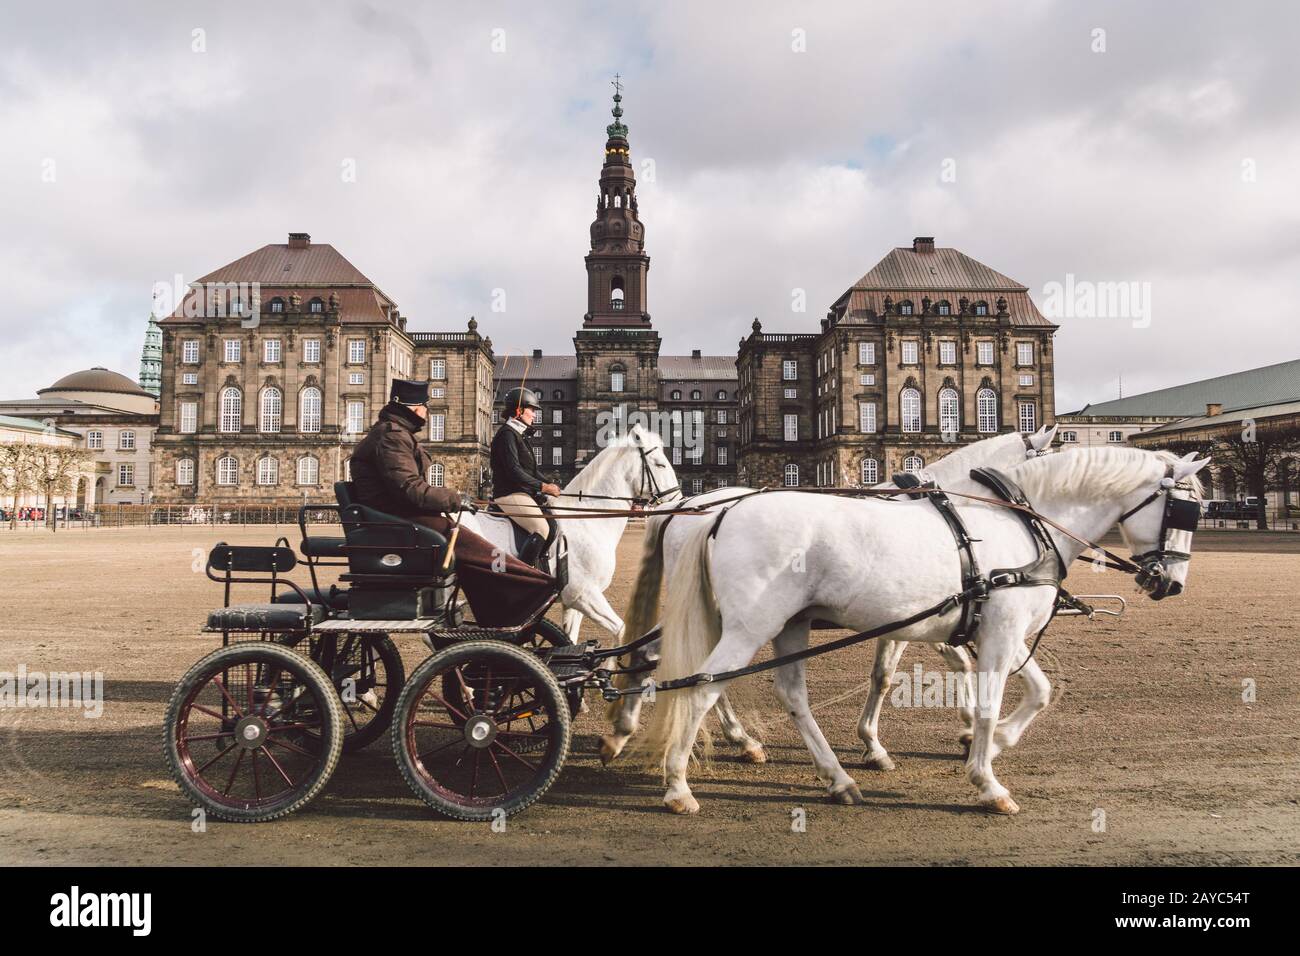 February 20, 2019. Military officer training two white horses from royal stables in front. Horses and cart with rider at Christi Stock Photo